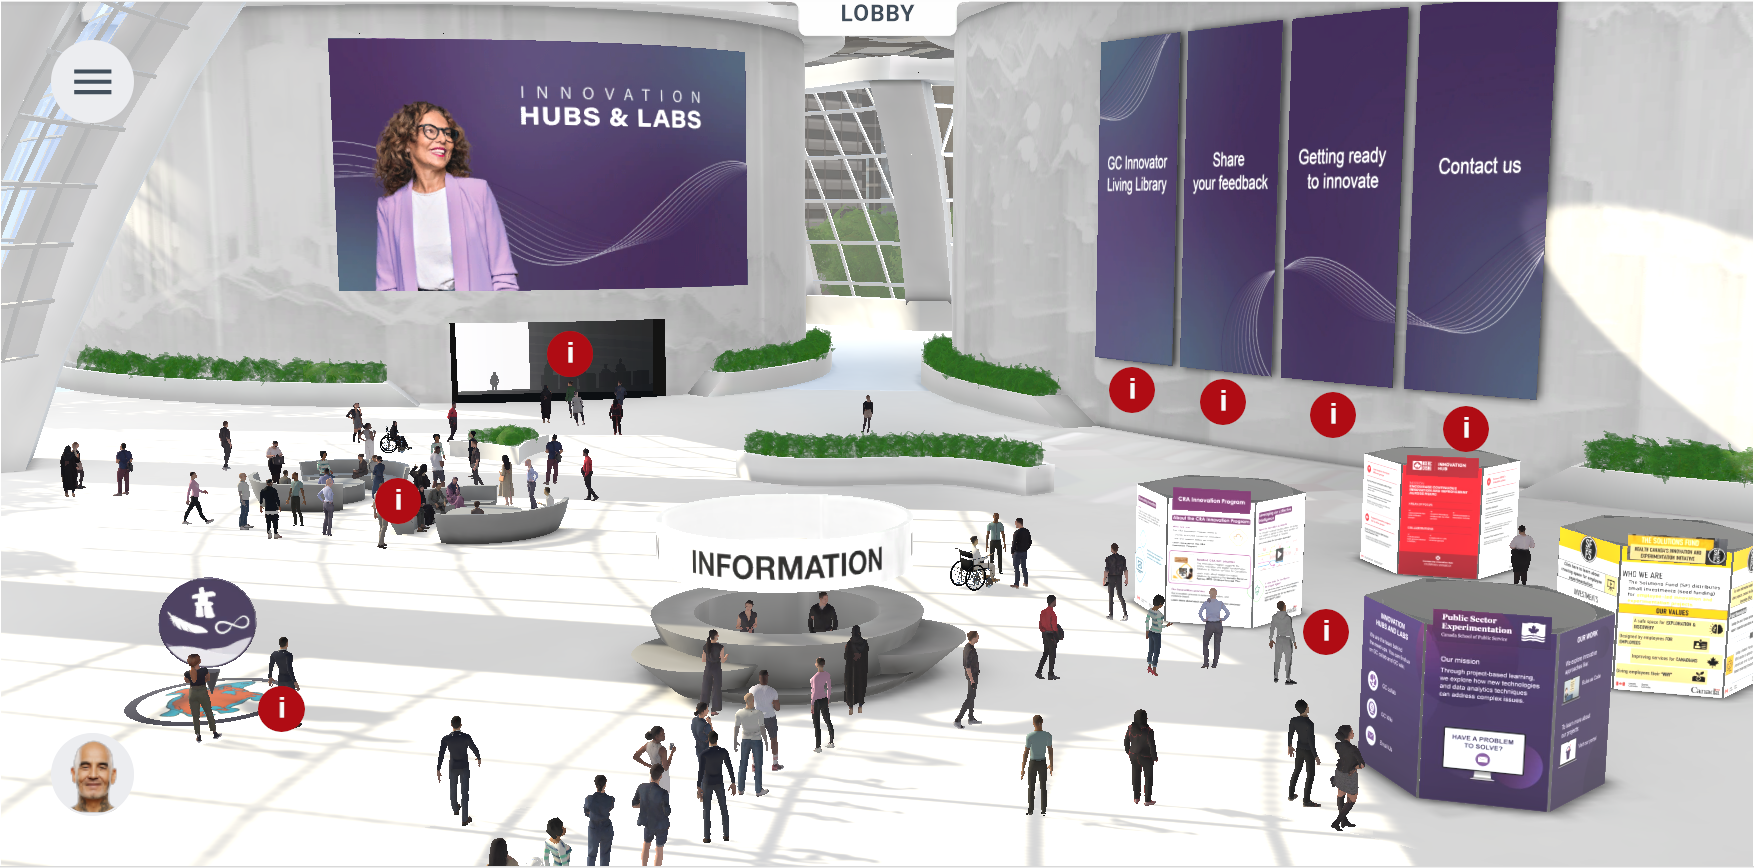 Virtual exhibition of innovation centers and labs of the Government of Canada